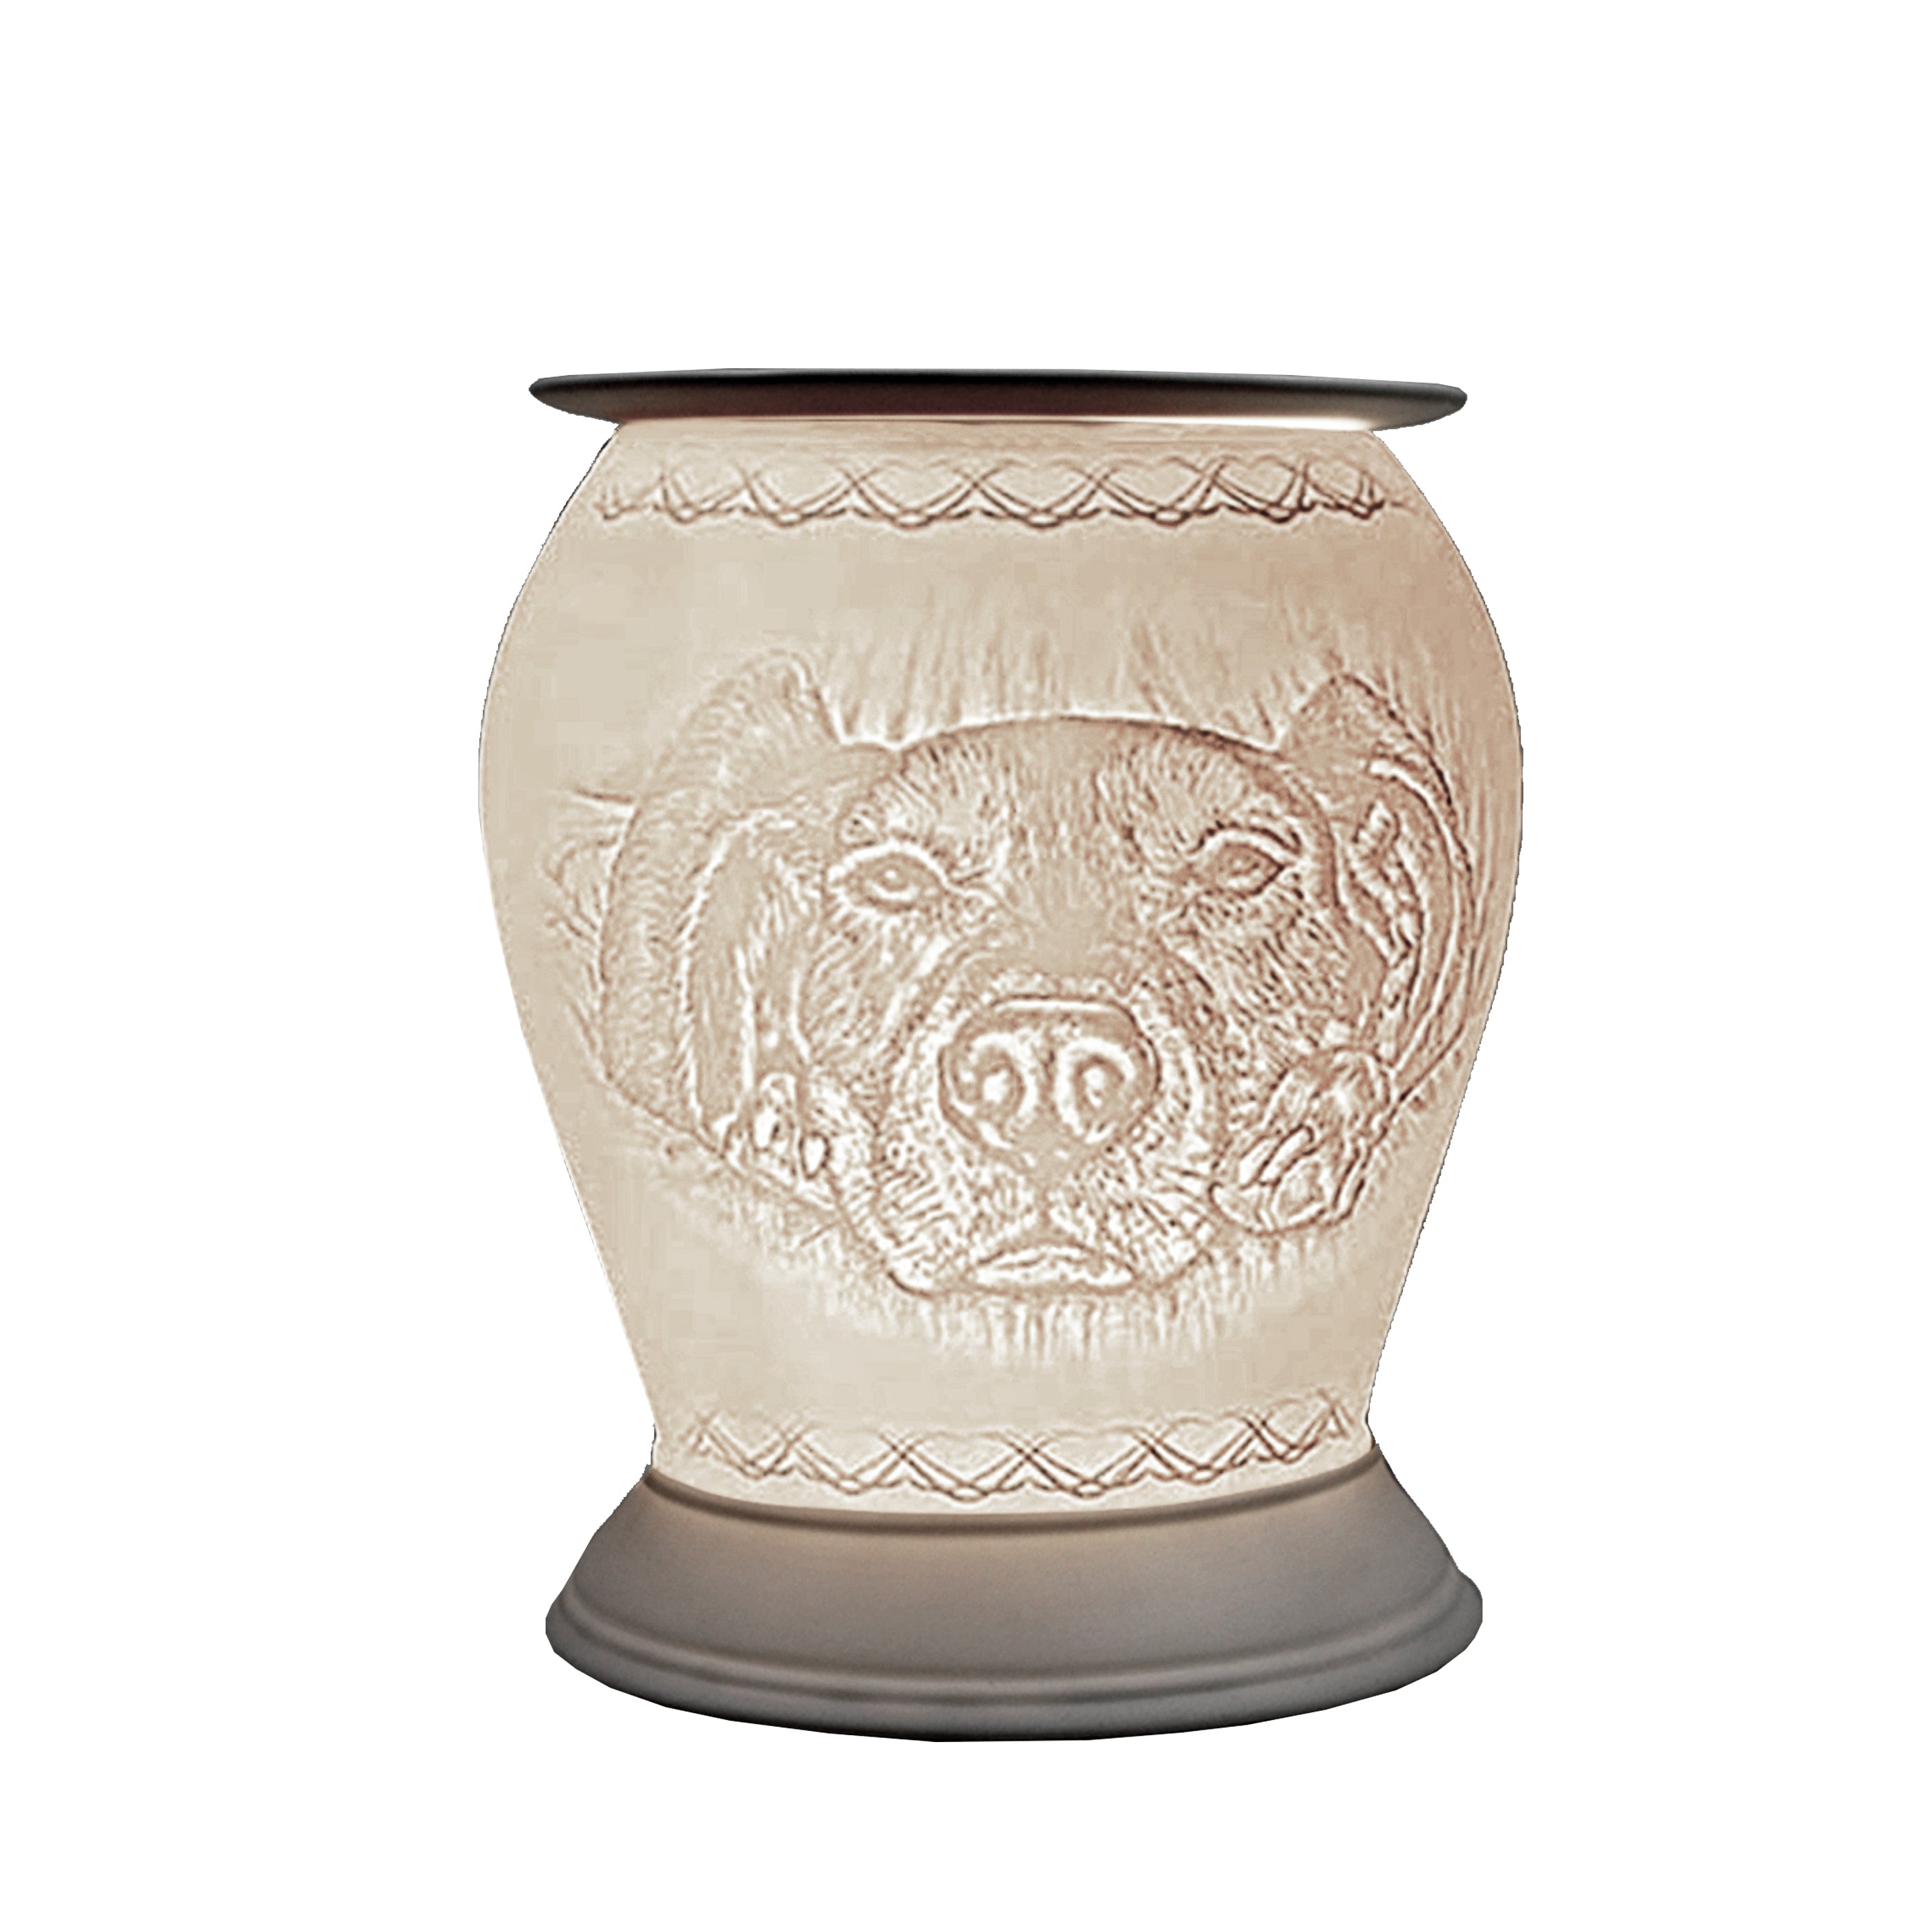 The porcelain material on this Wax Melt Burner allows bright light to shine through it, providing the opportunity to create this cute Dog design. This is done by crafting images out of thicker and thinner sections of the porcelain, allowing for detailed shadowing and a 3D effect. The porcelains elegant look will fit perfectly in any room is available in a range of designs and two different shapes.